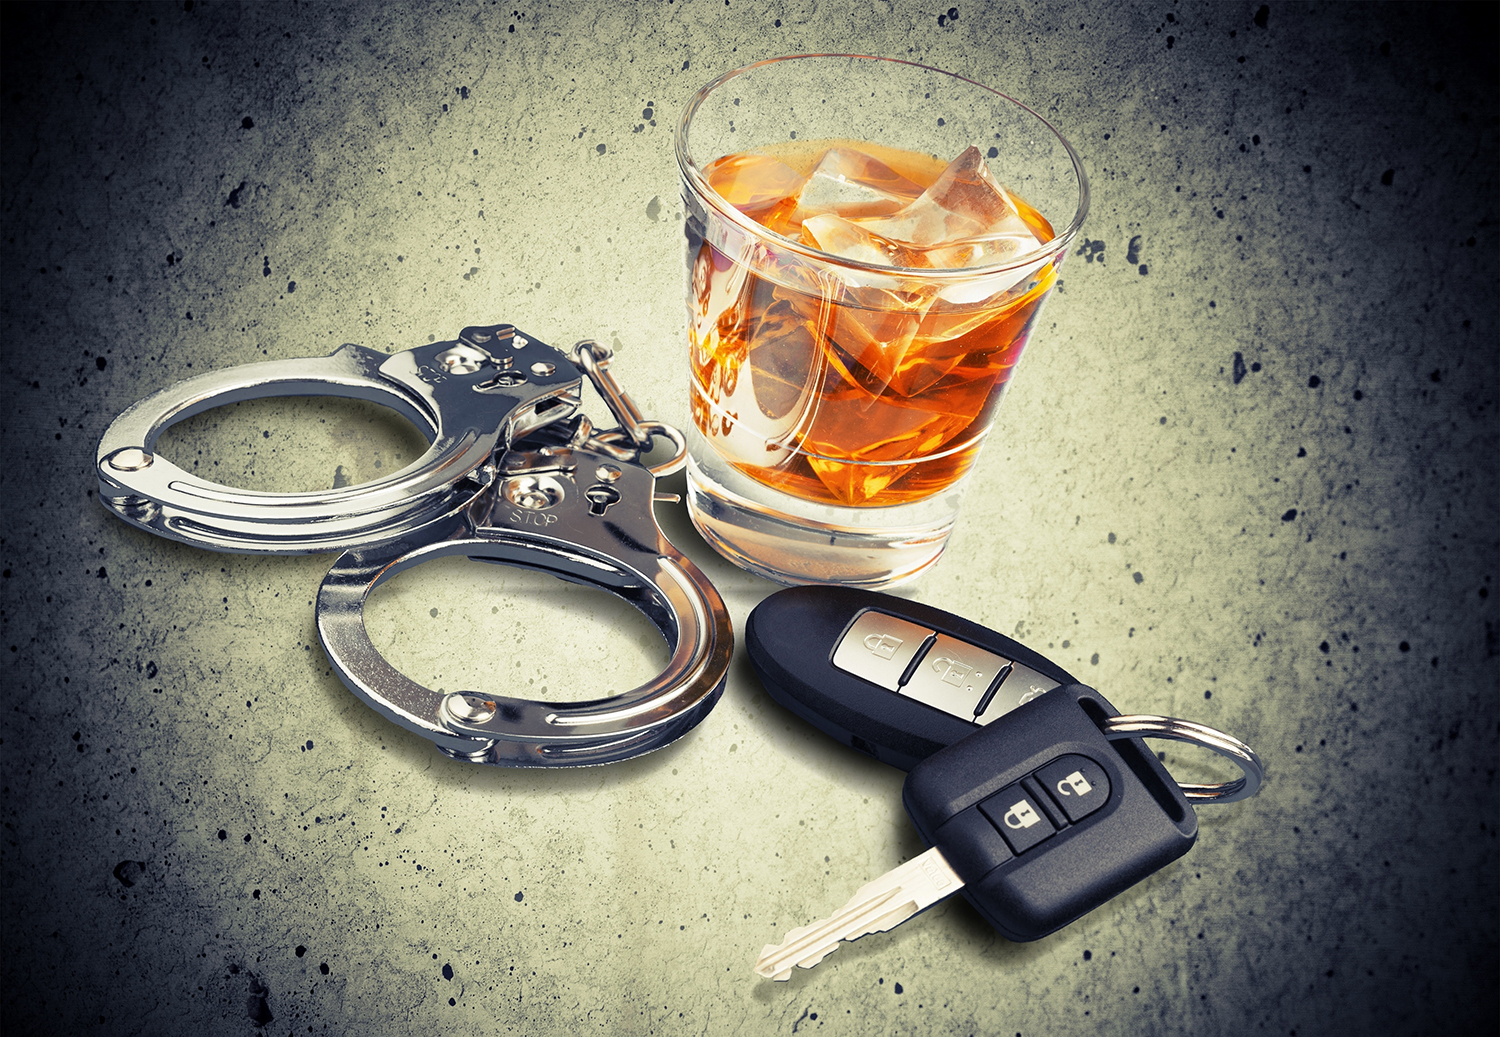 Massachusetts High Court Opens 27,000 Drunk Driving Cases to Reconsideration